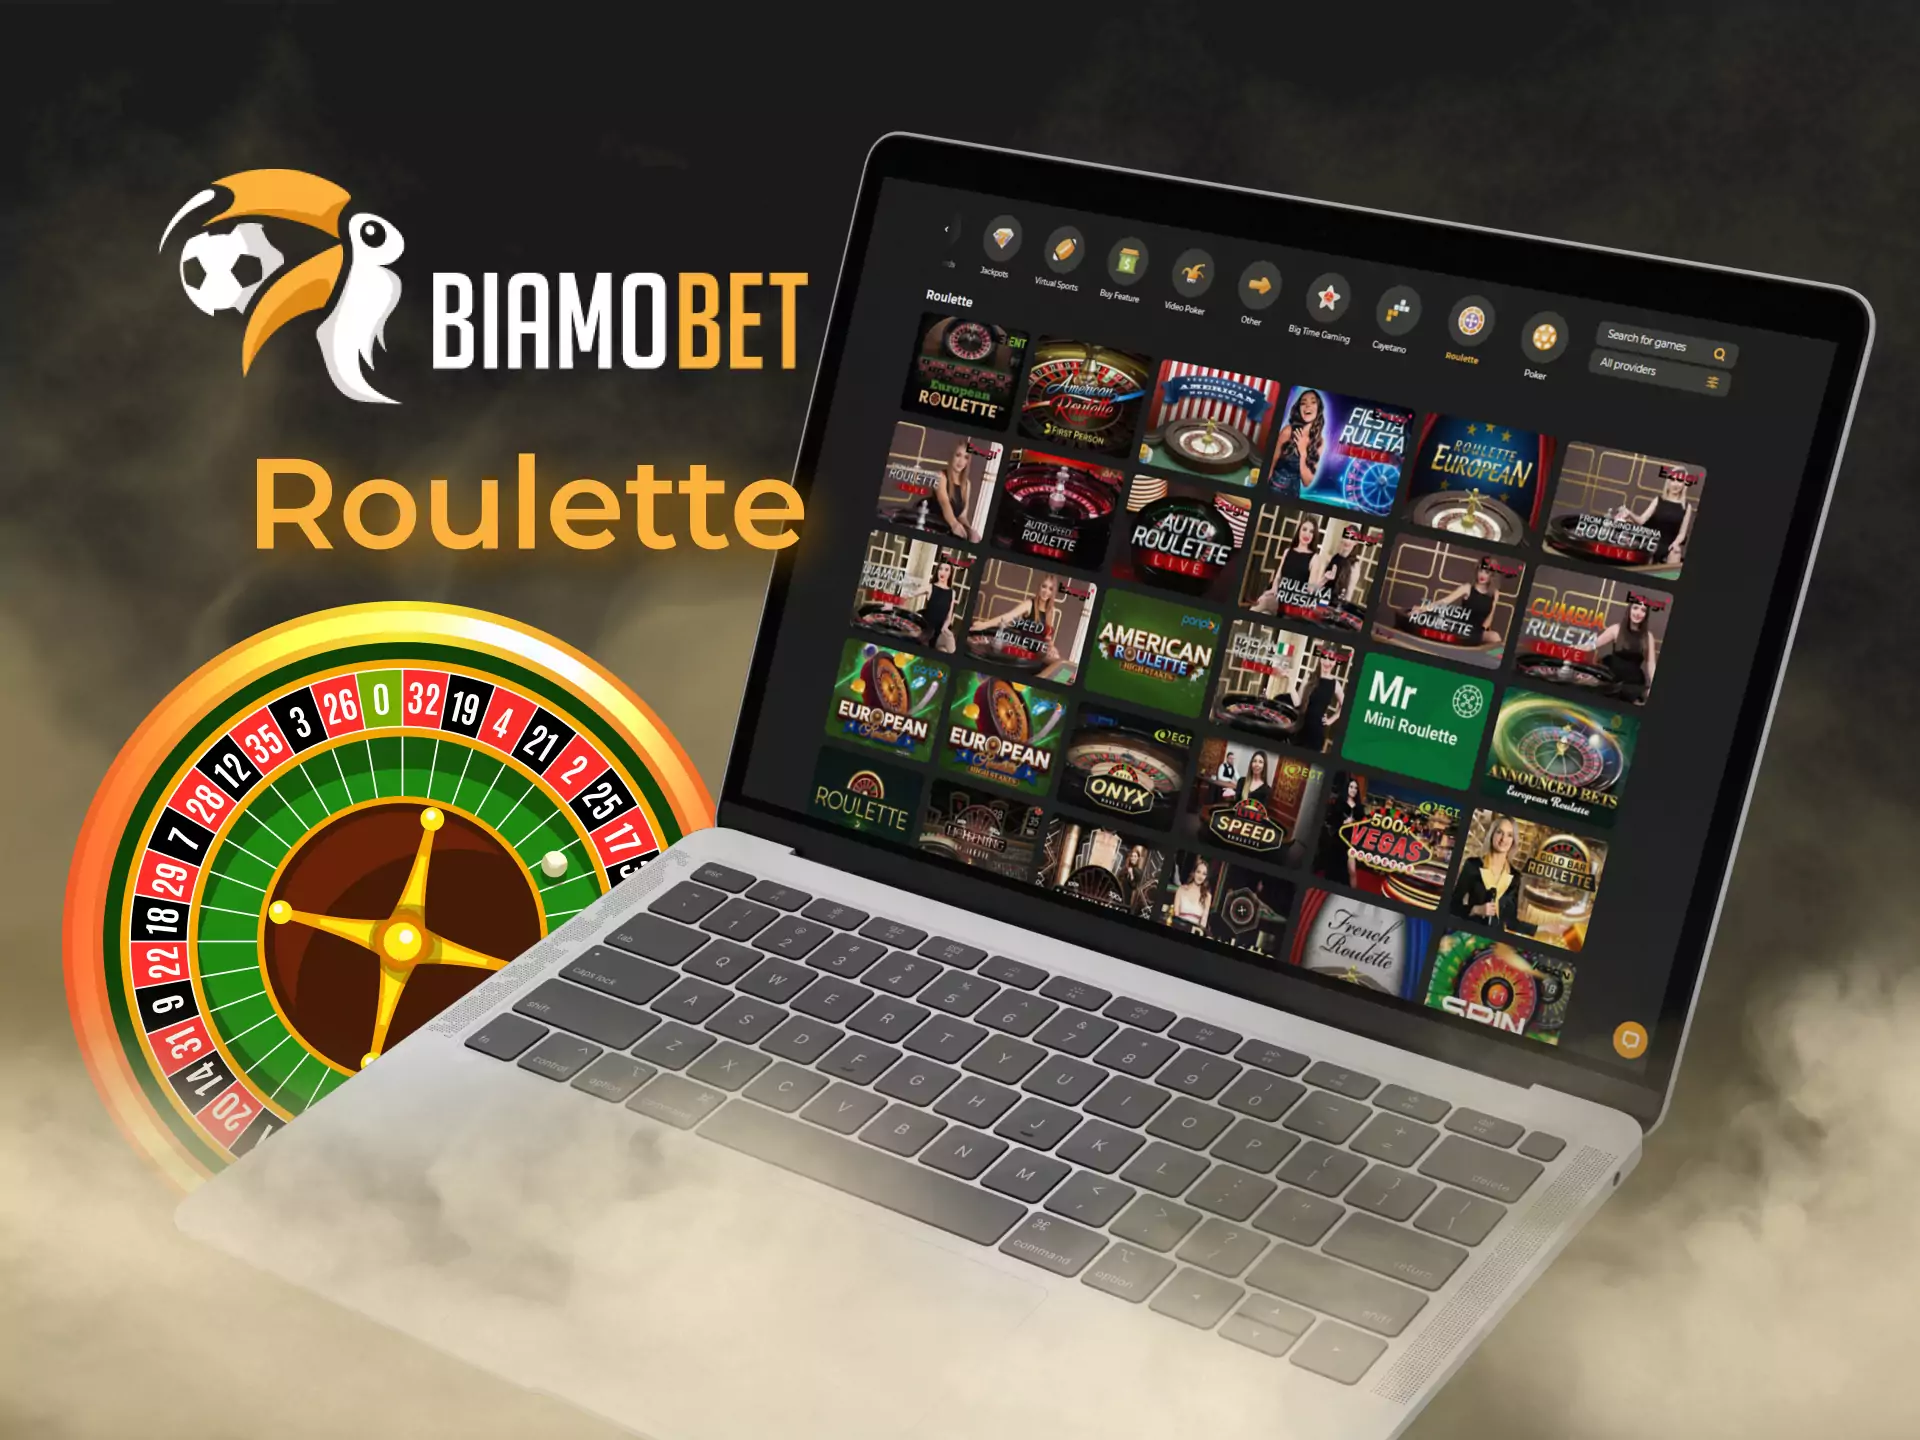 Test your fortune by playing Roulette games on Biamobet.